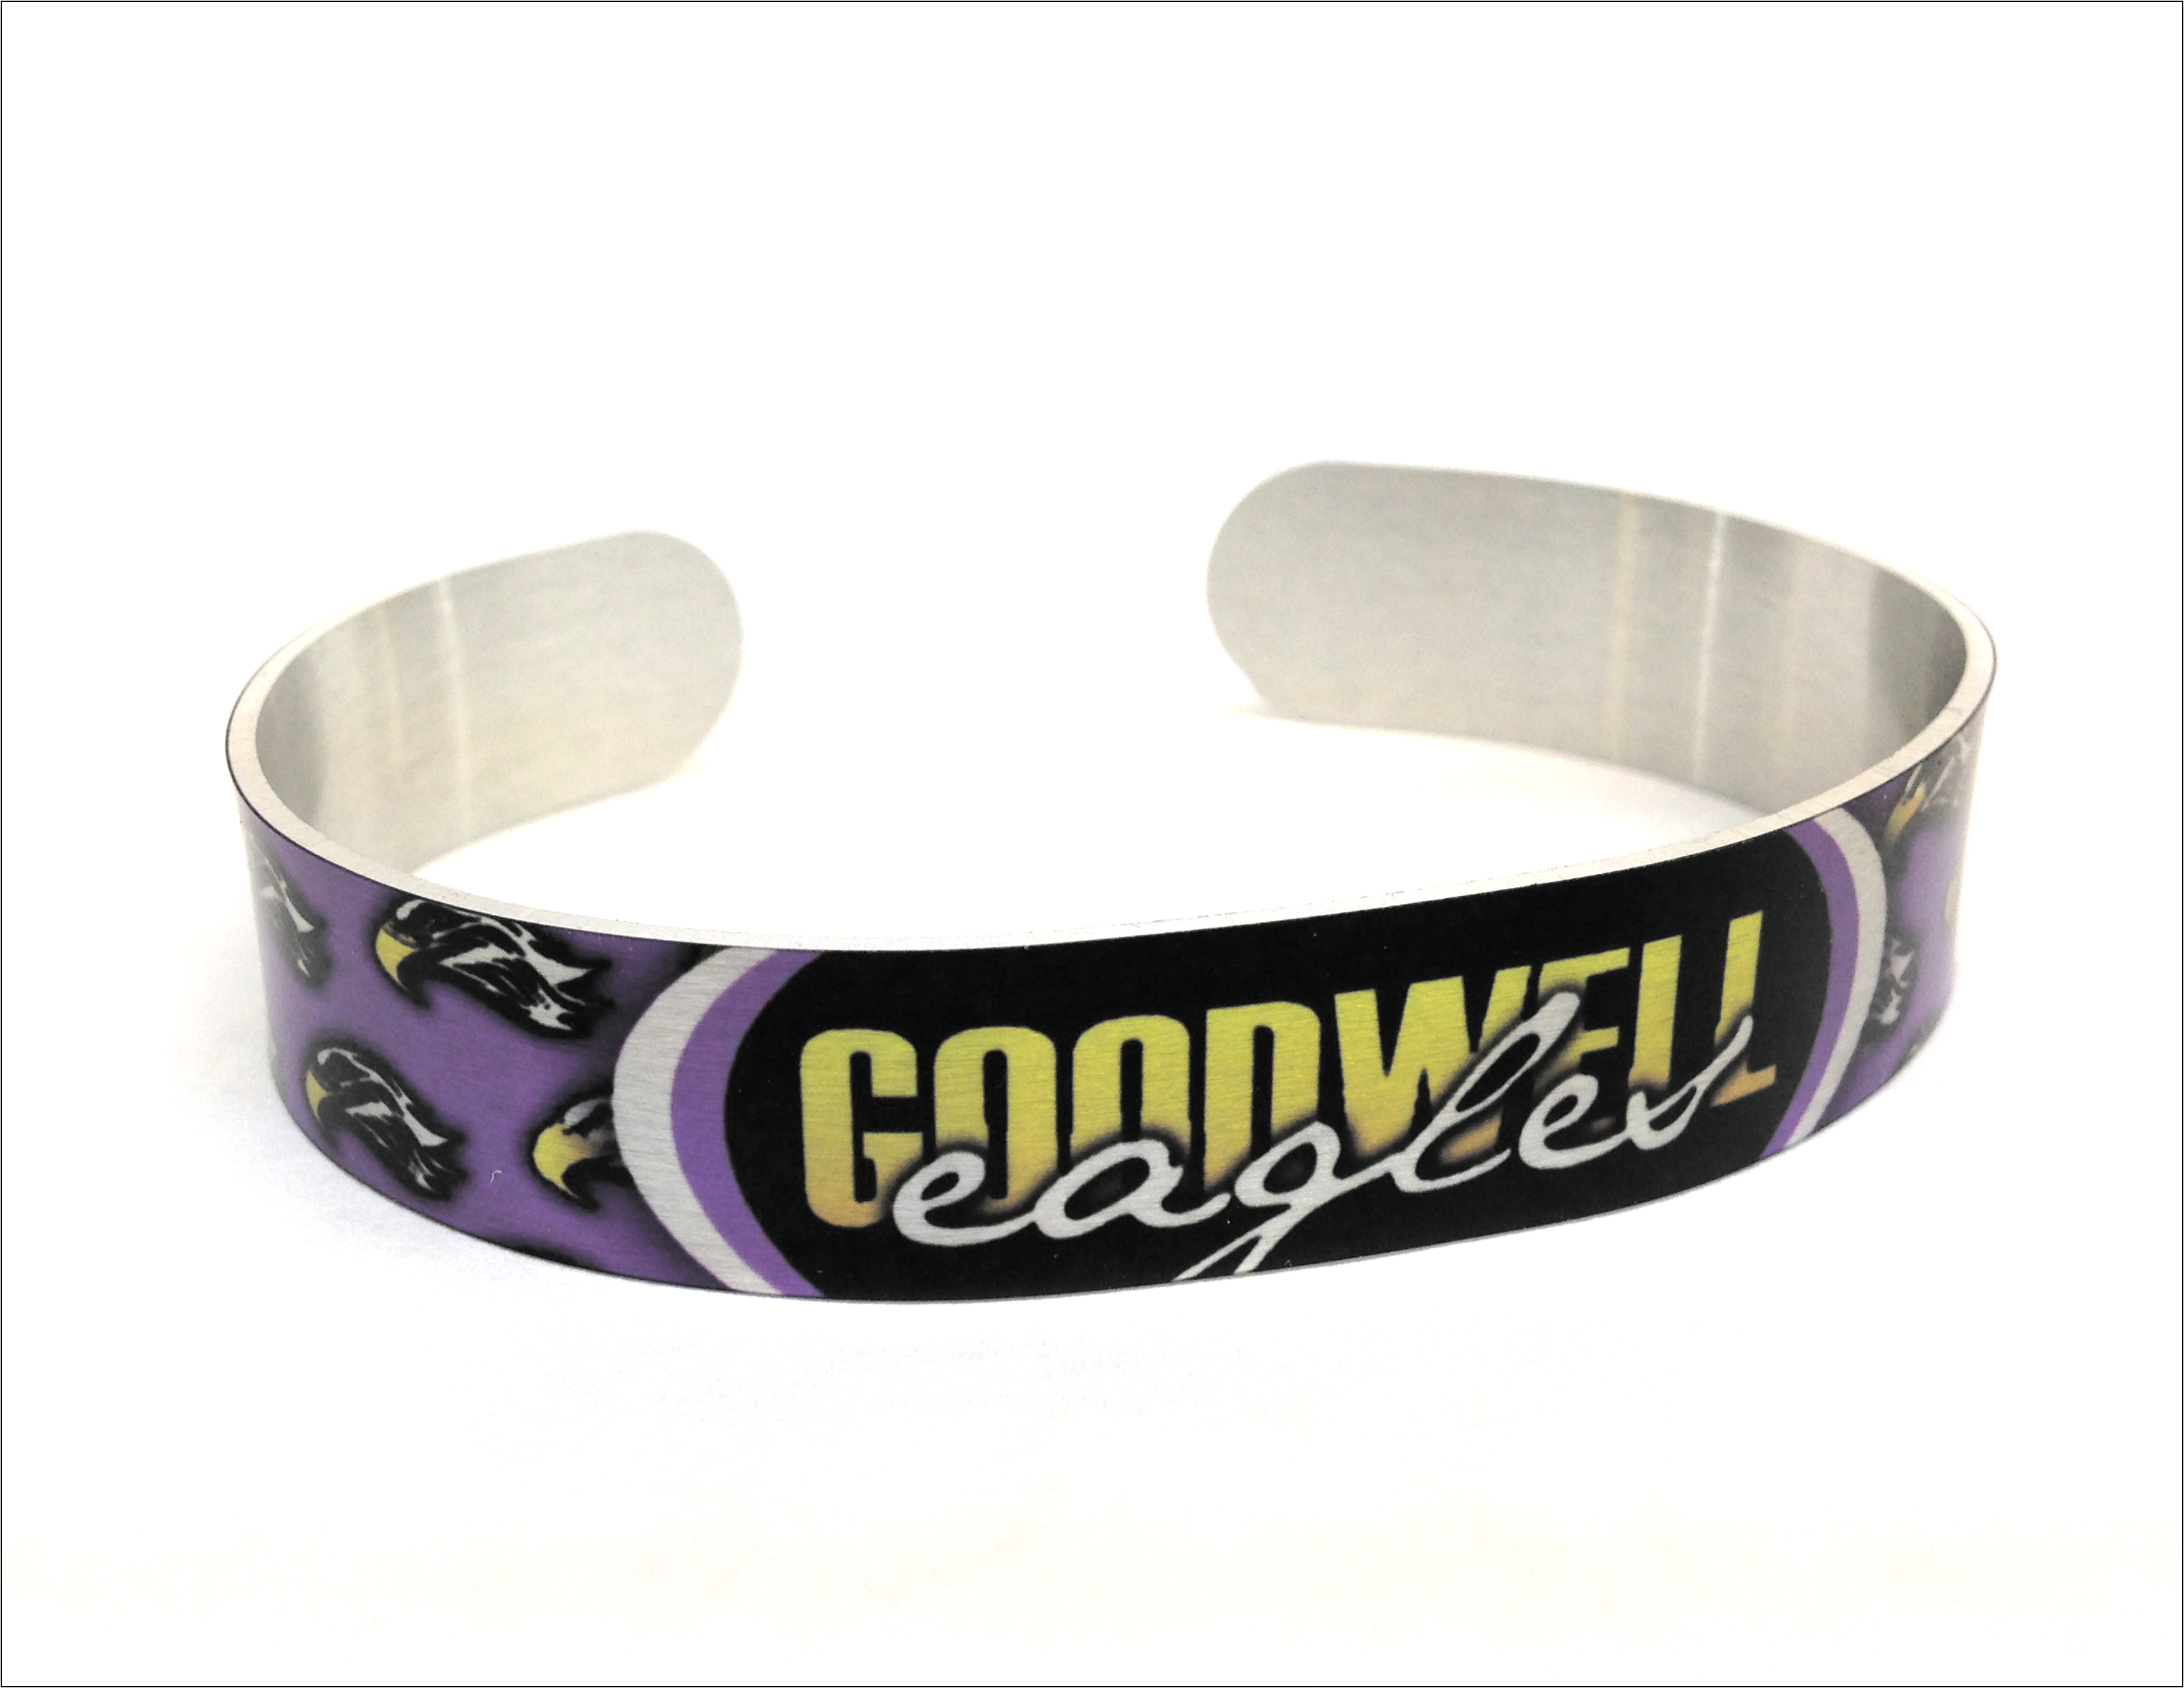 Eagle Small Cuff made with sublimation printing